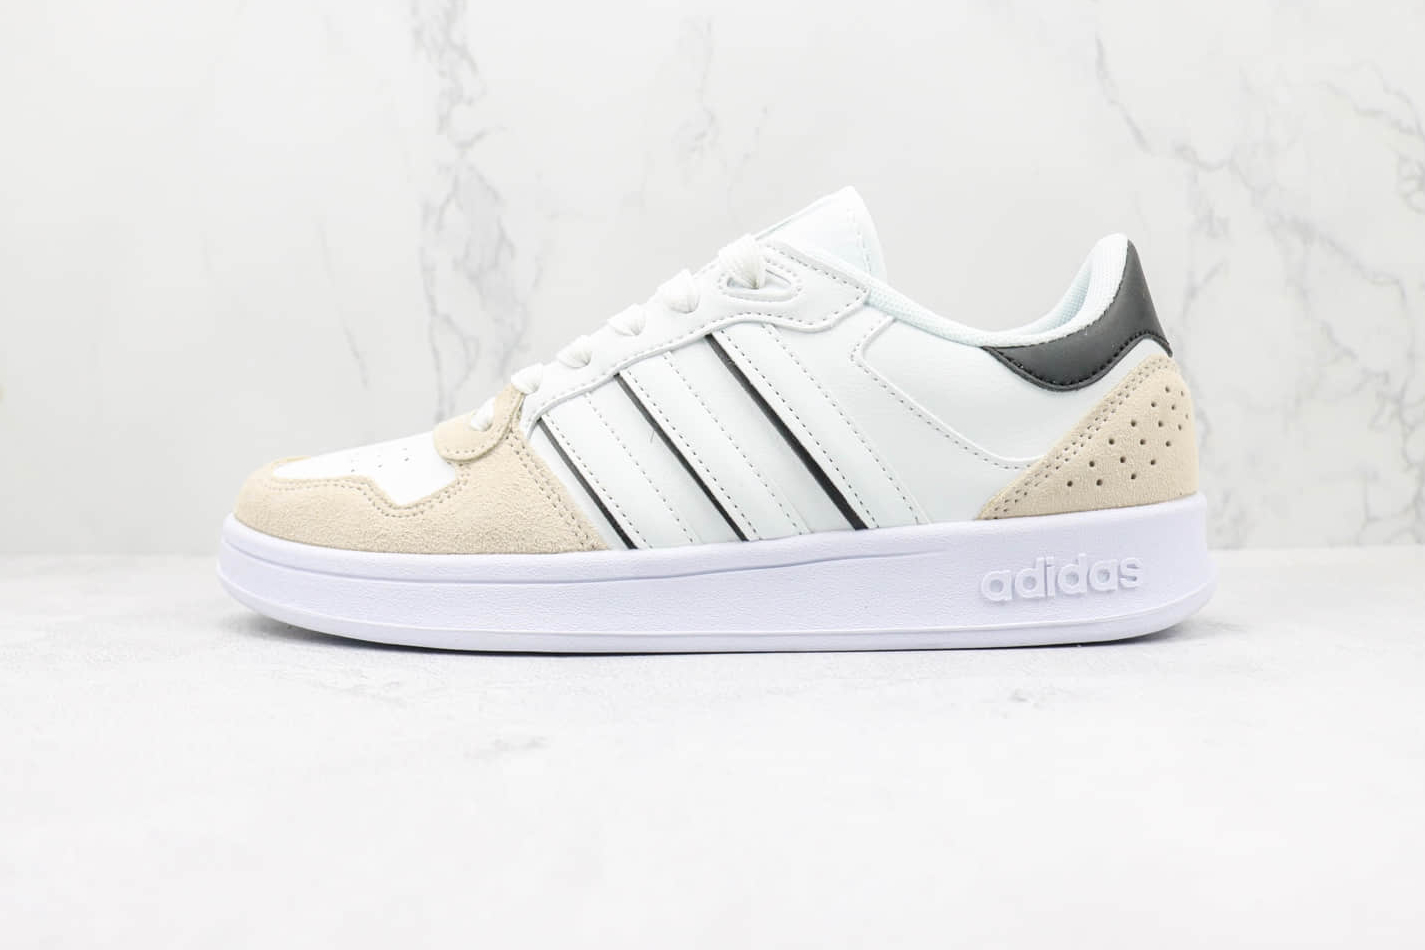 Adidas Neo Breaknet Plus FY5914 - Trendy and Stylish Sneakers